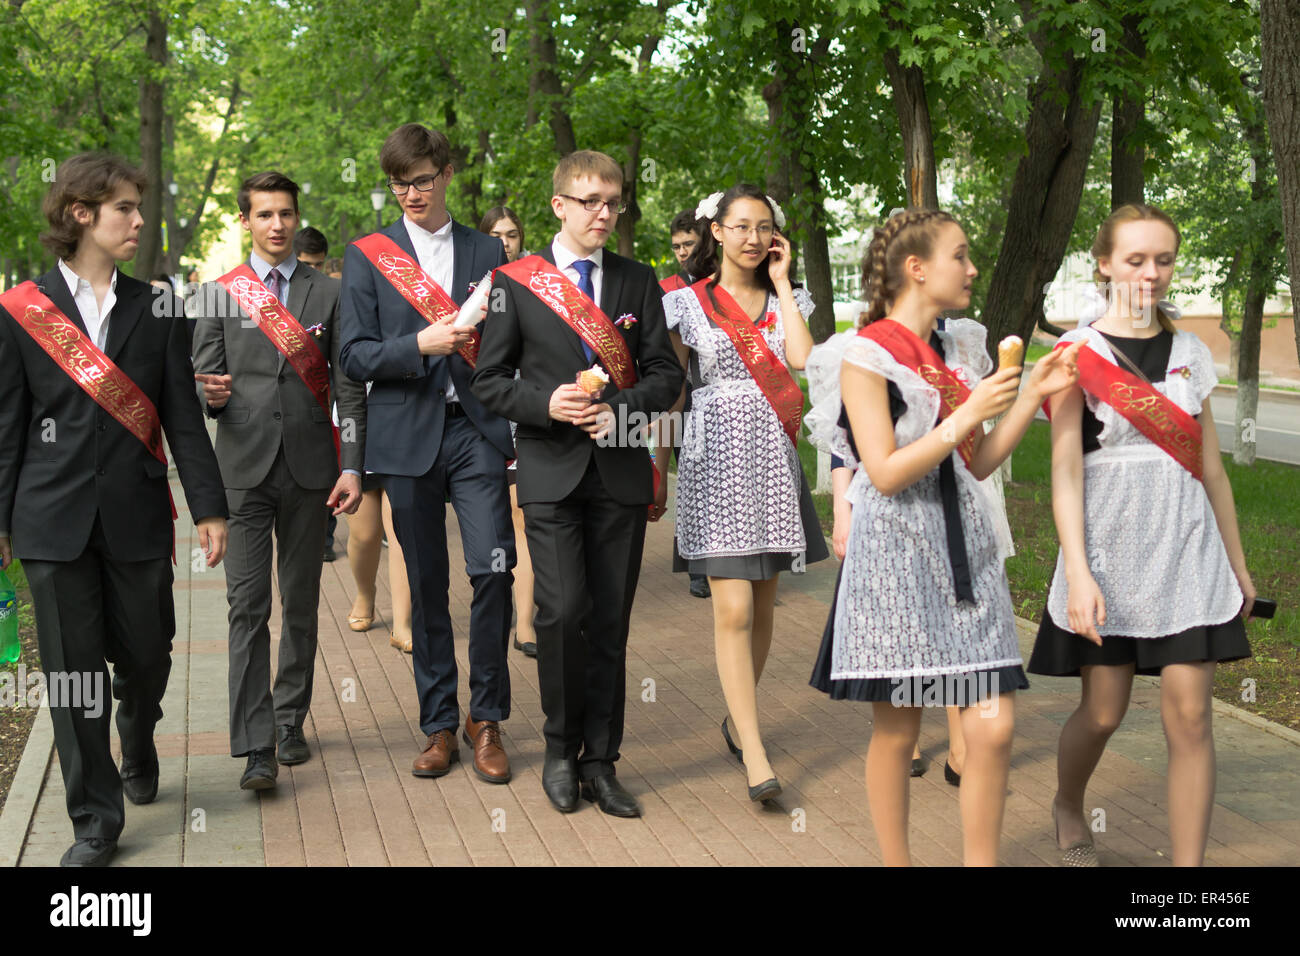 Group of Russian schoolchildren in traditional uniform celebrating graduation from high school in May 2015 Stock Photo